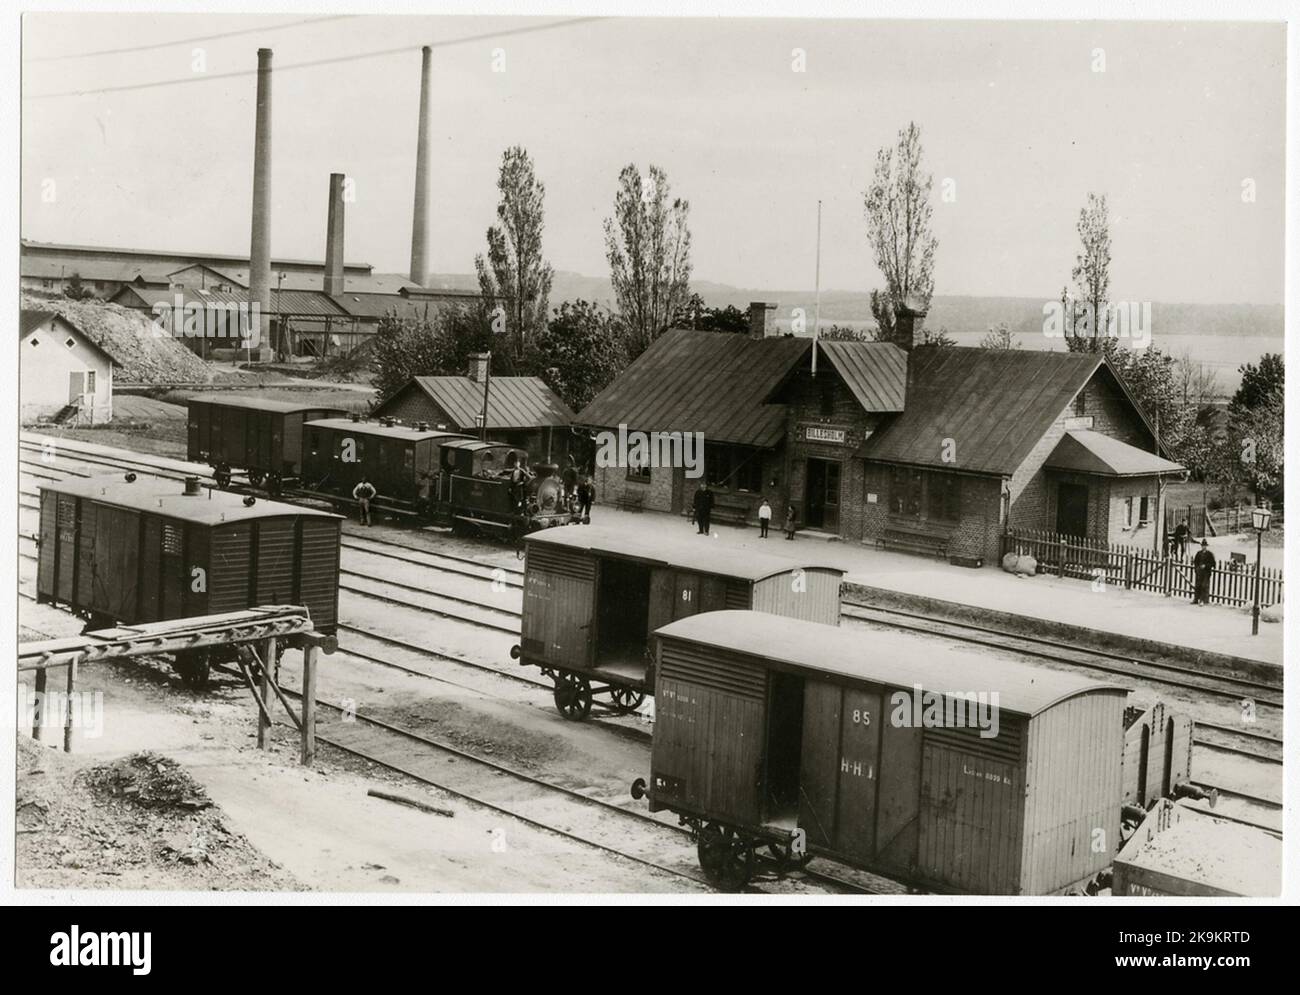 Billesholm = HHJ station location from Bjuv with Lok Hhj 9 Billeholm Photo by 1915 probably 1800 speech station and track area completely wiped out at industrial building 1970s. HHJ, Helsingborg - Hässleholms Railway. The picture also shows freight wagons HHJ 82 and HHJ 81 Stock Photo